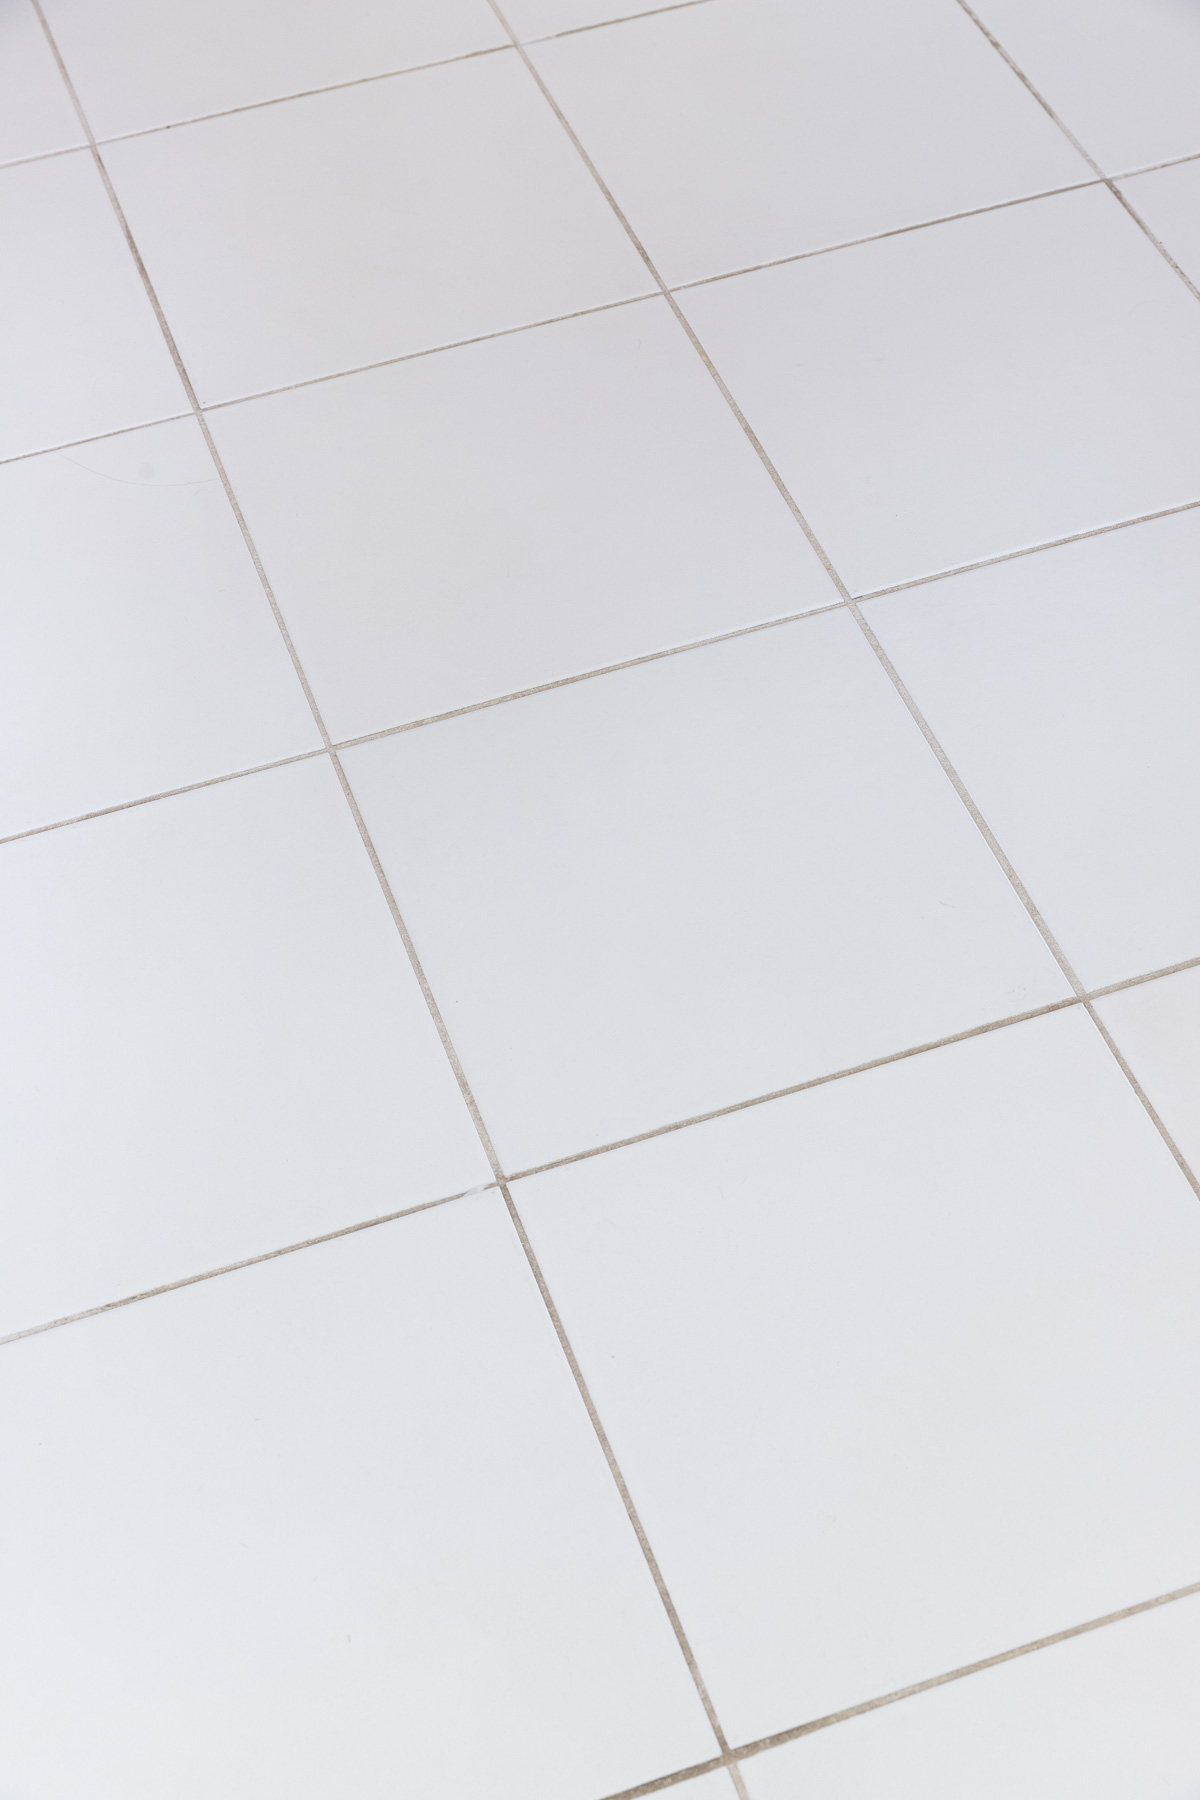 How To Keep Your White Grout Clean